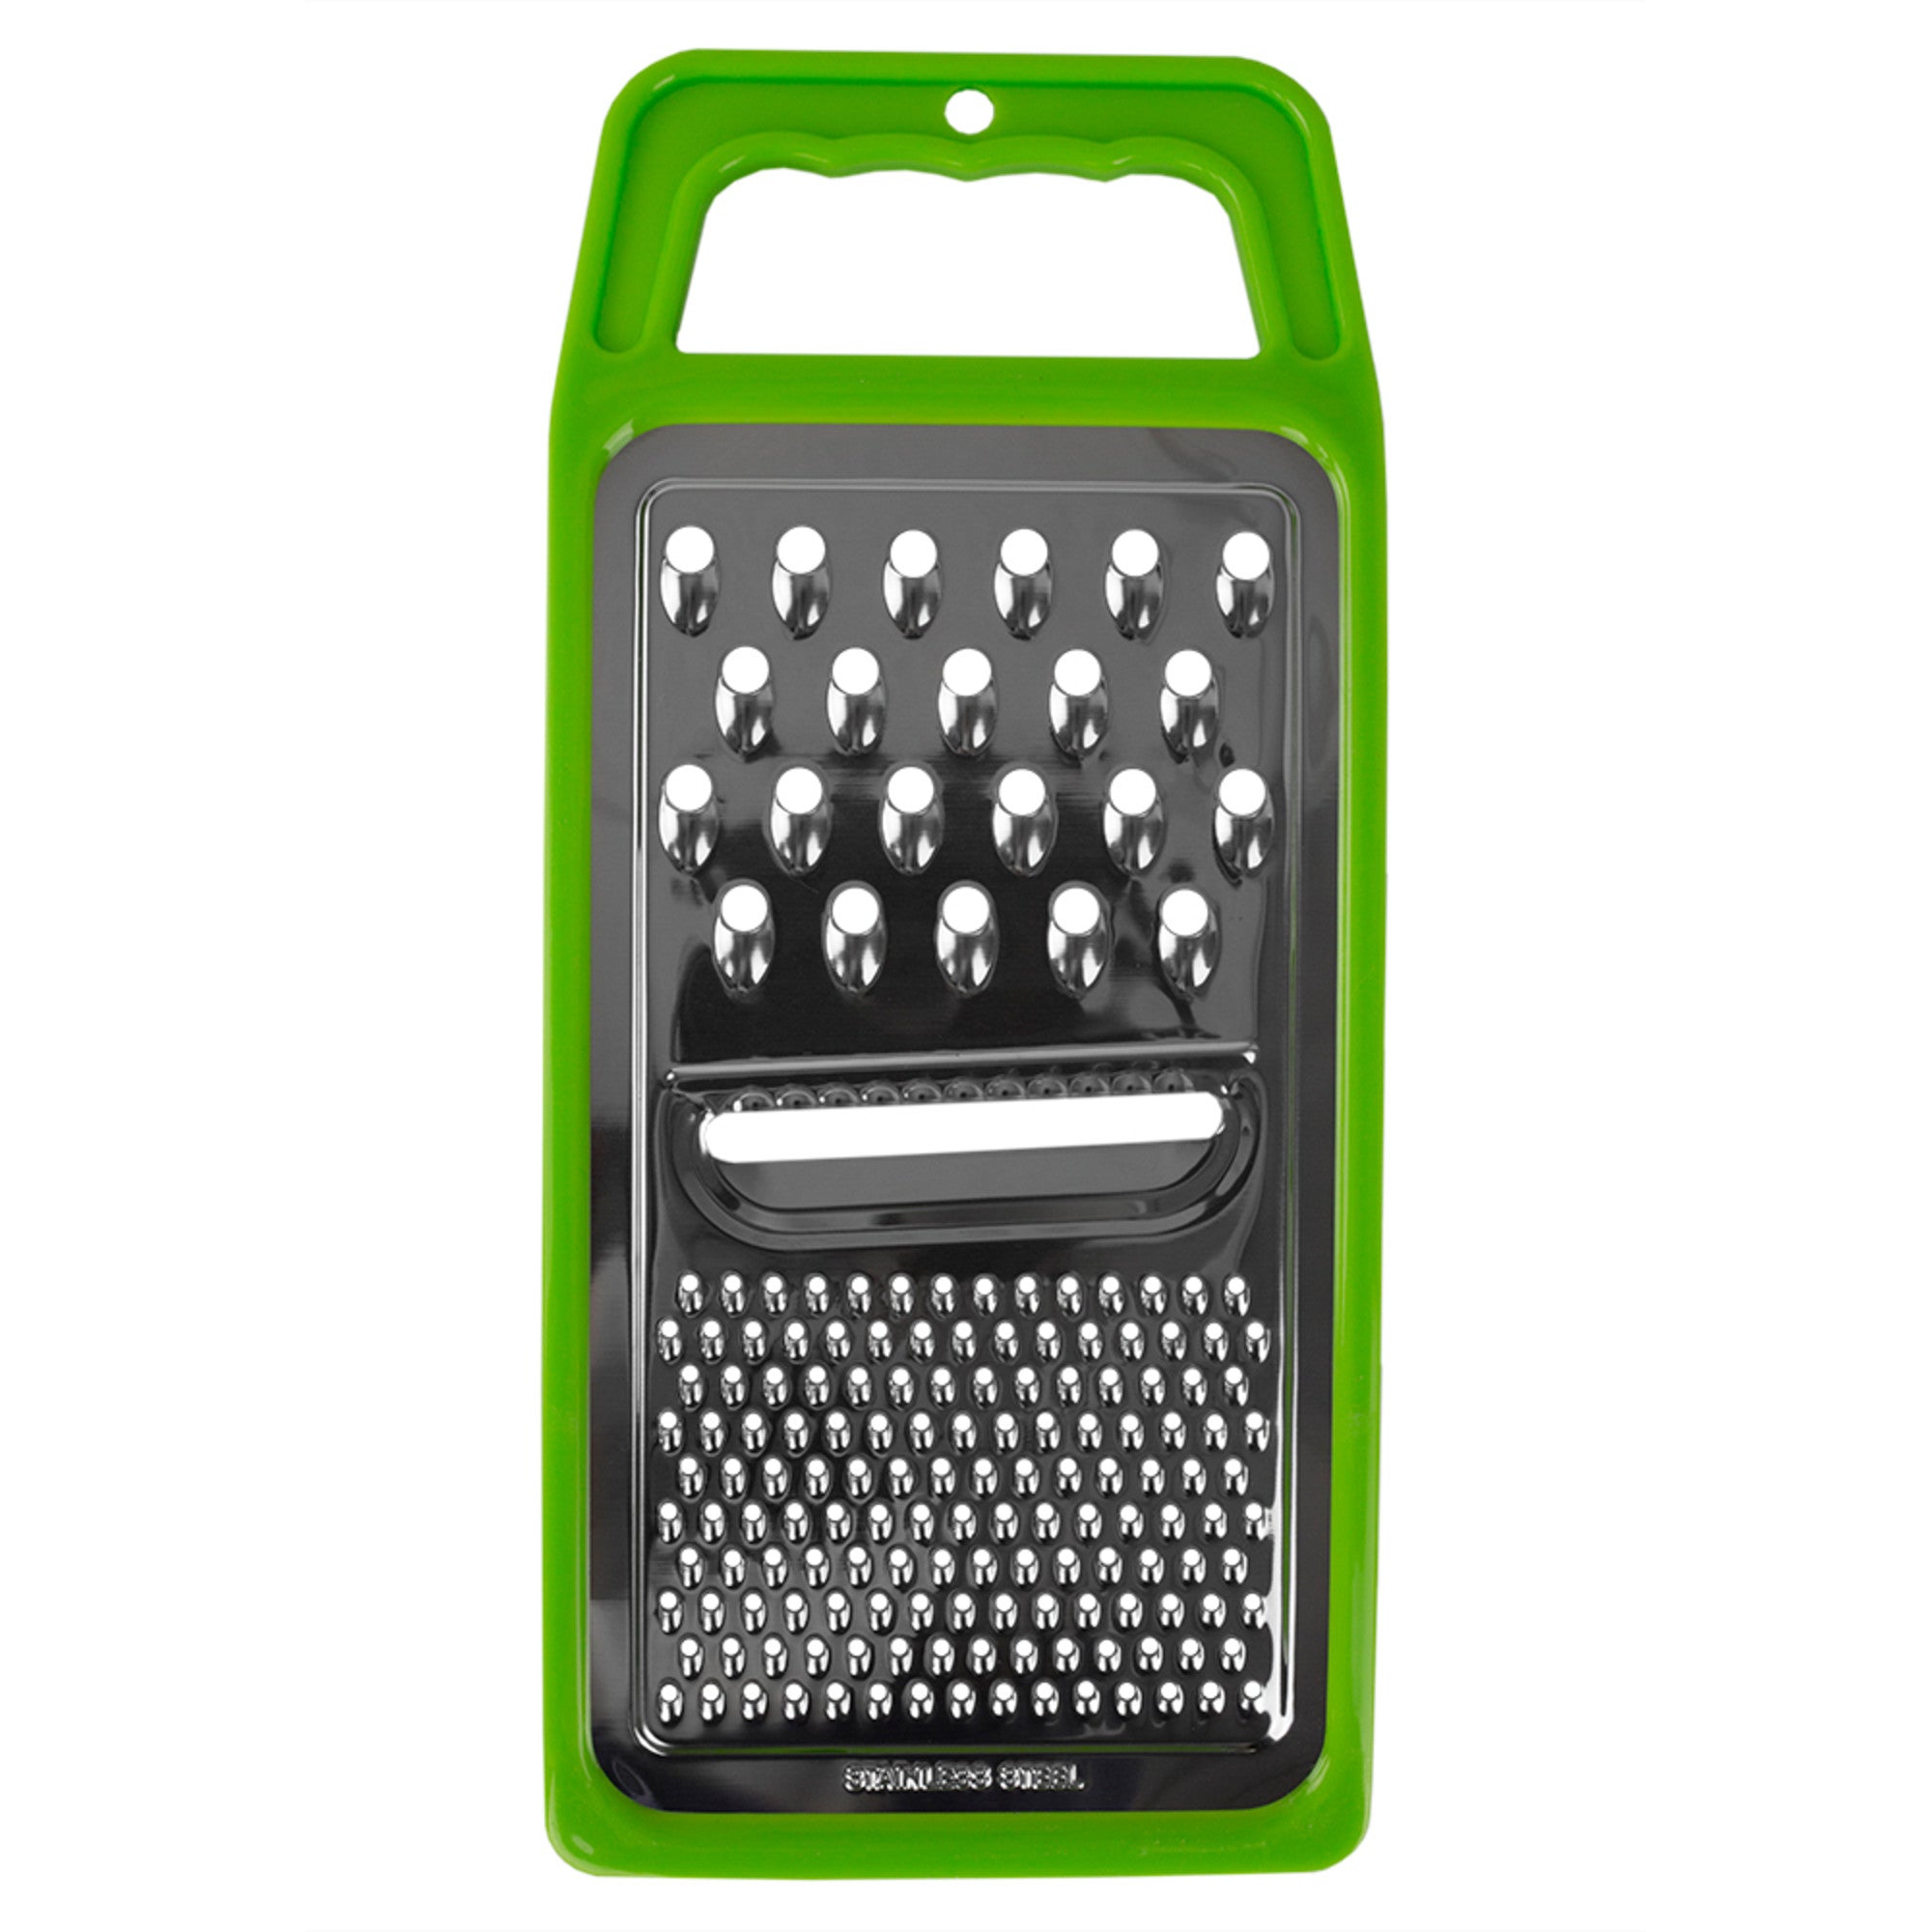 Home Basics Heavy Weight 6 Sided Stainless Steel Cheese Grater